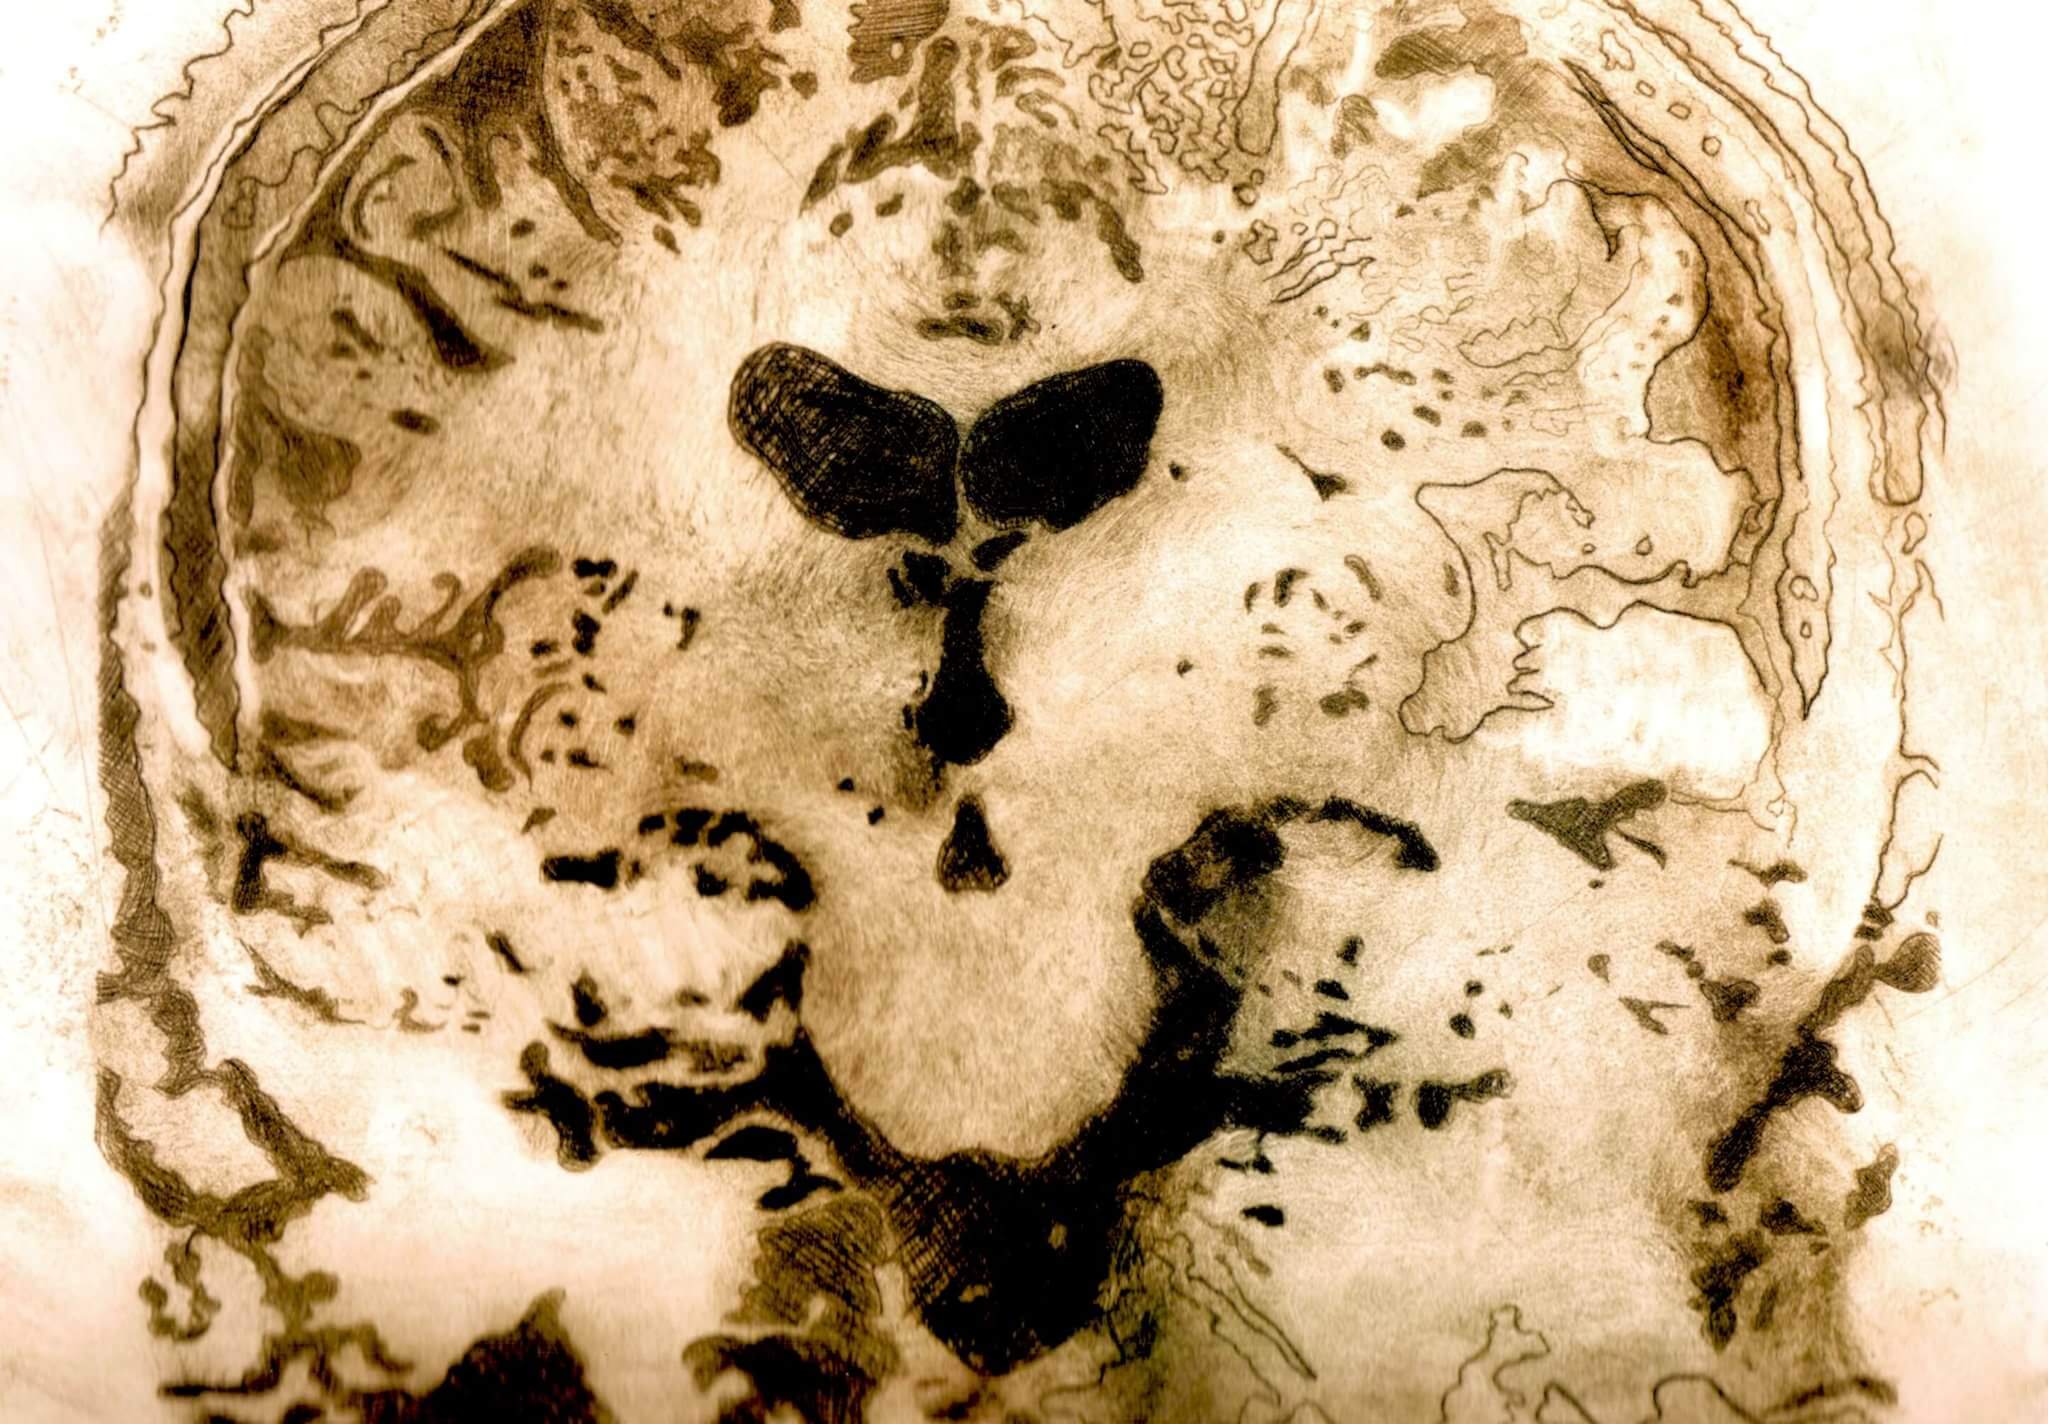 Dry point etching of a brain. Courtesy of Nod Ghosh.